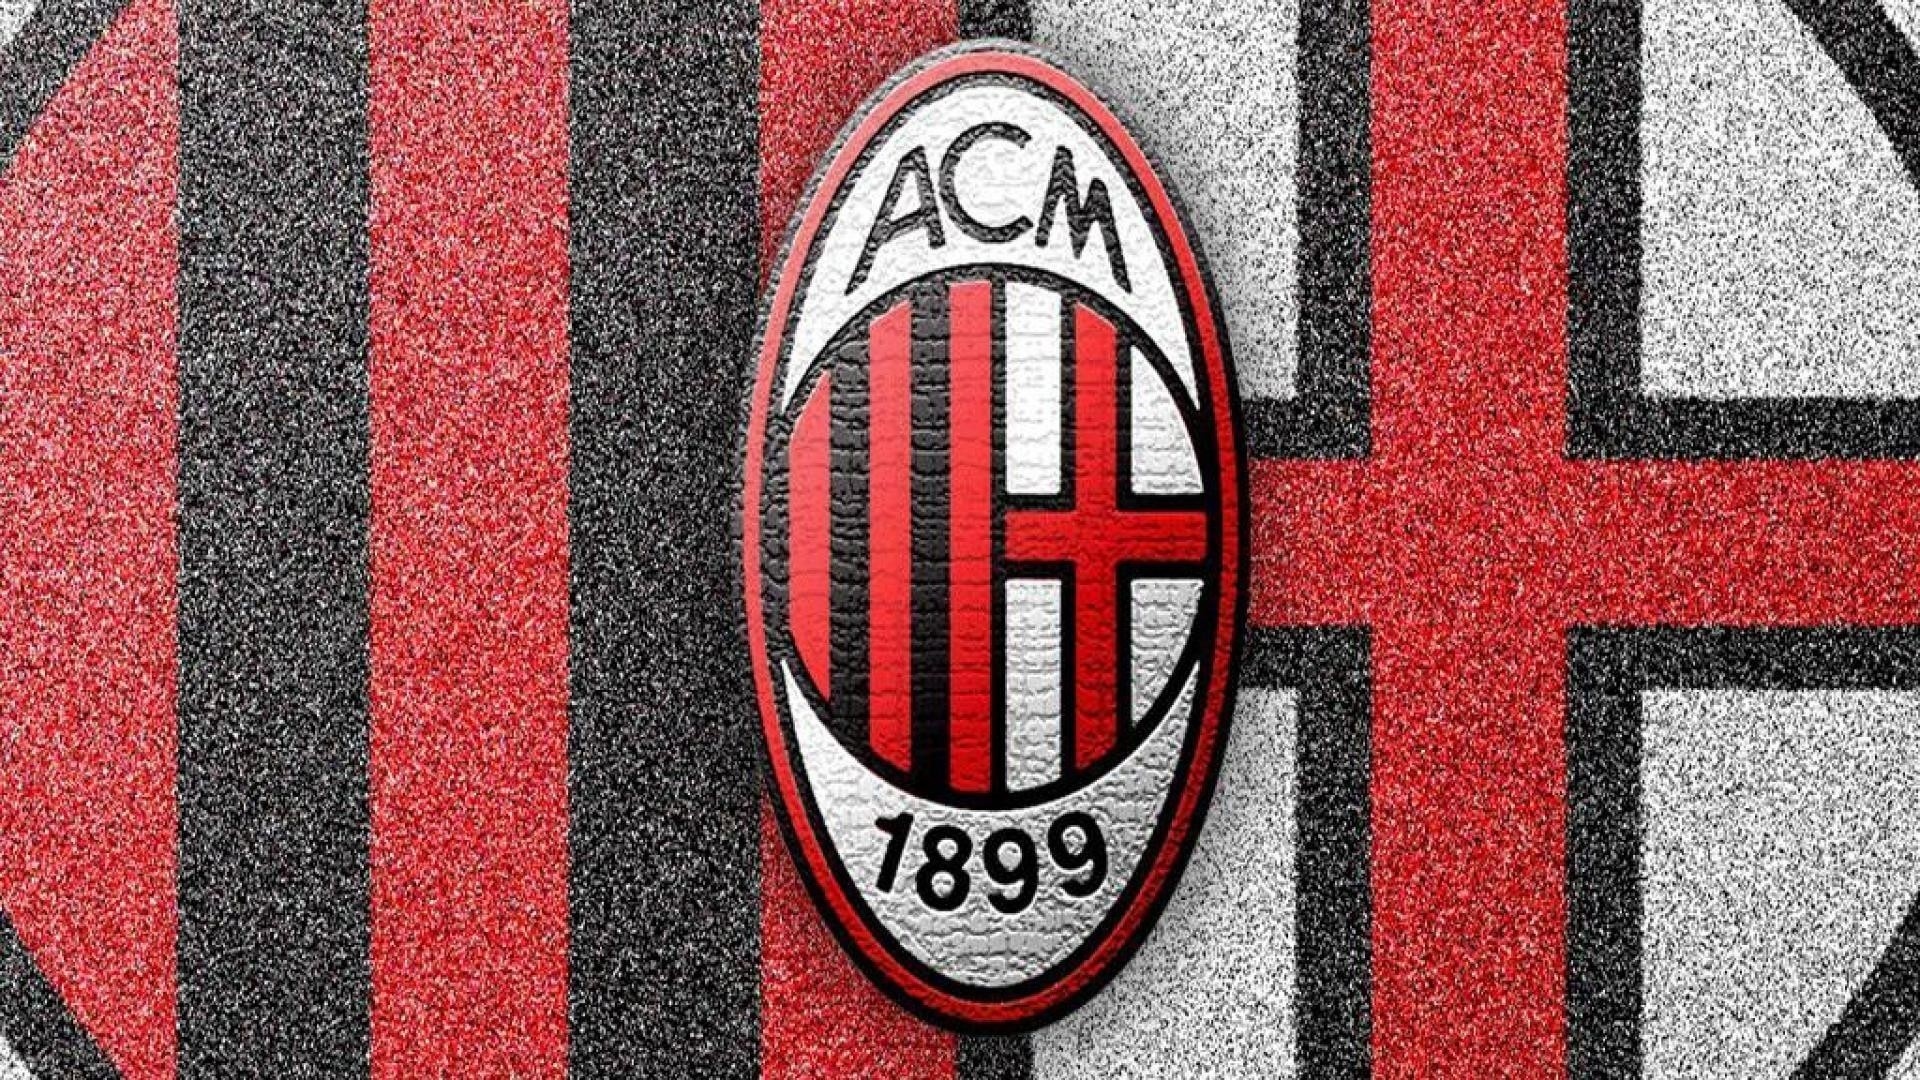 AC Milan, Football wallpapers, Club tradition, Soccer excellence, 1920x1080 Full HD Desktop